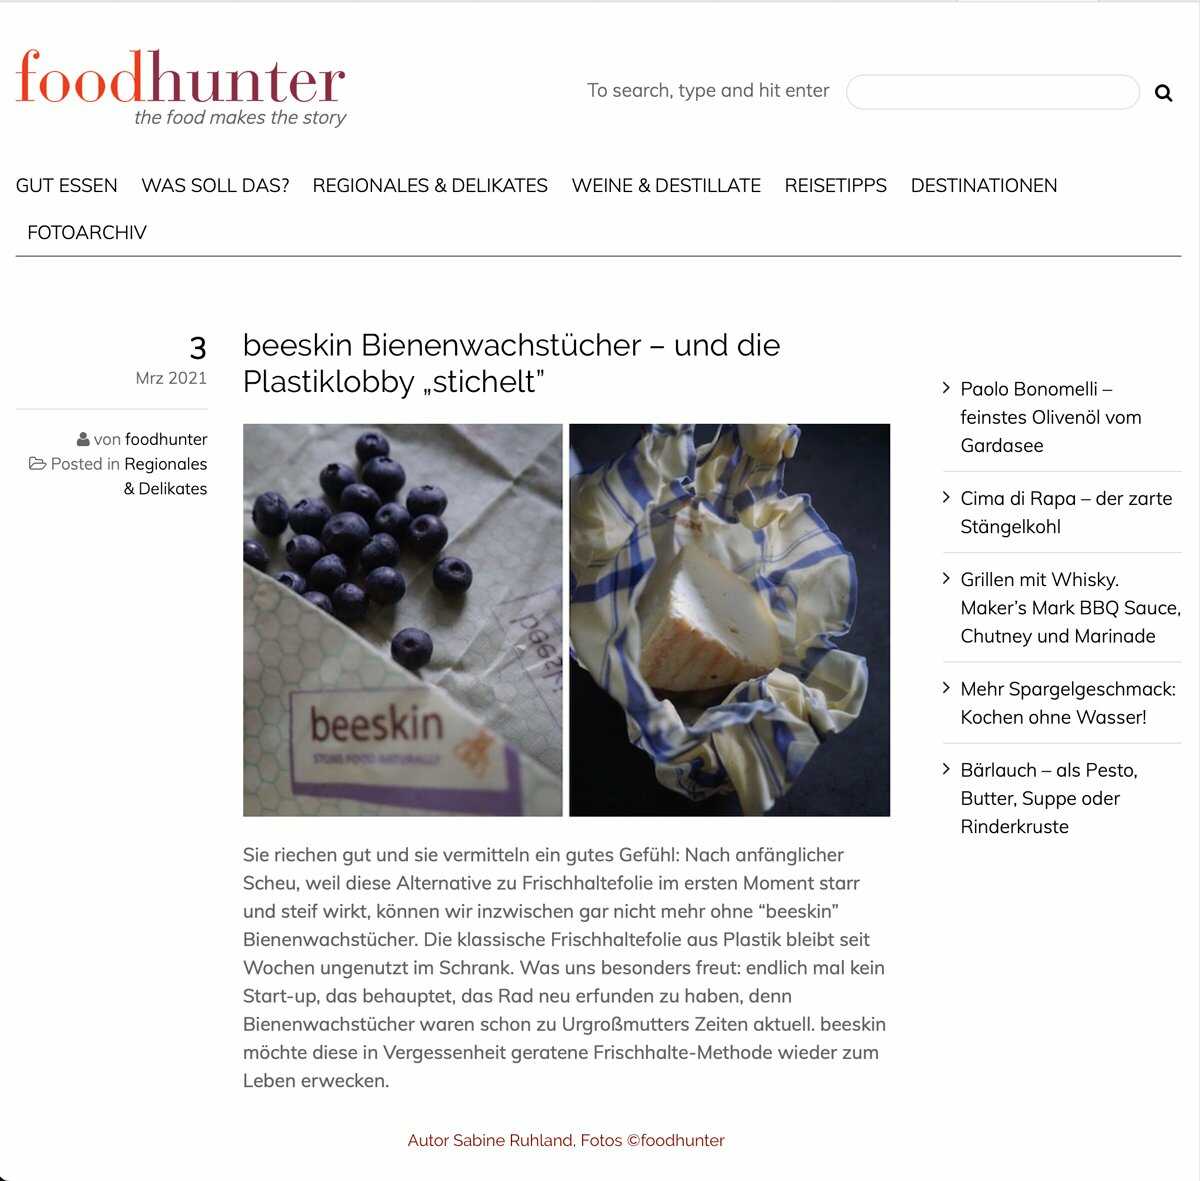 foodhunter Artikel, picture showing blueberries and cheese wrapped in beeswax wraps to store them